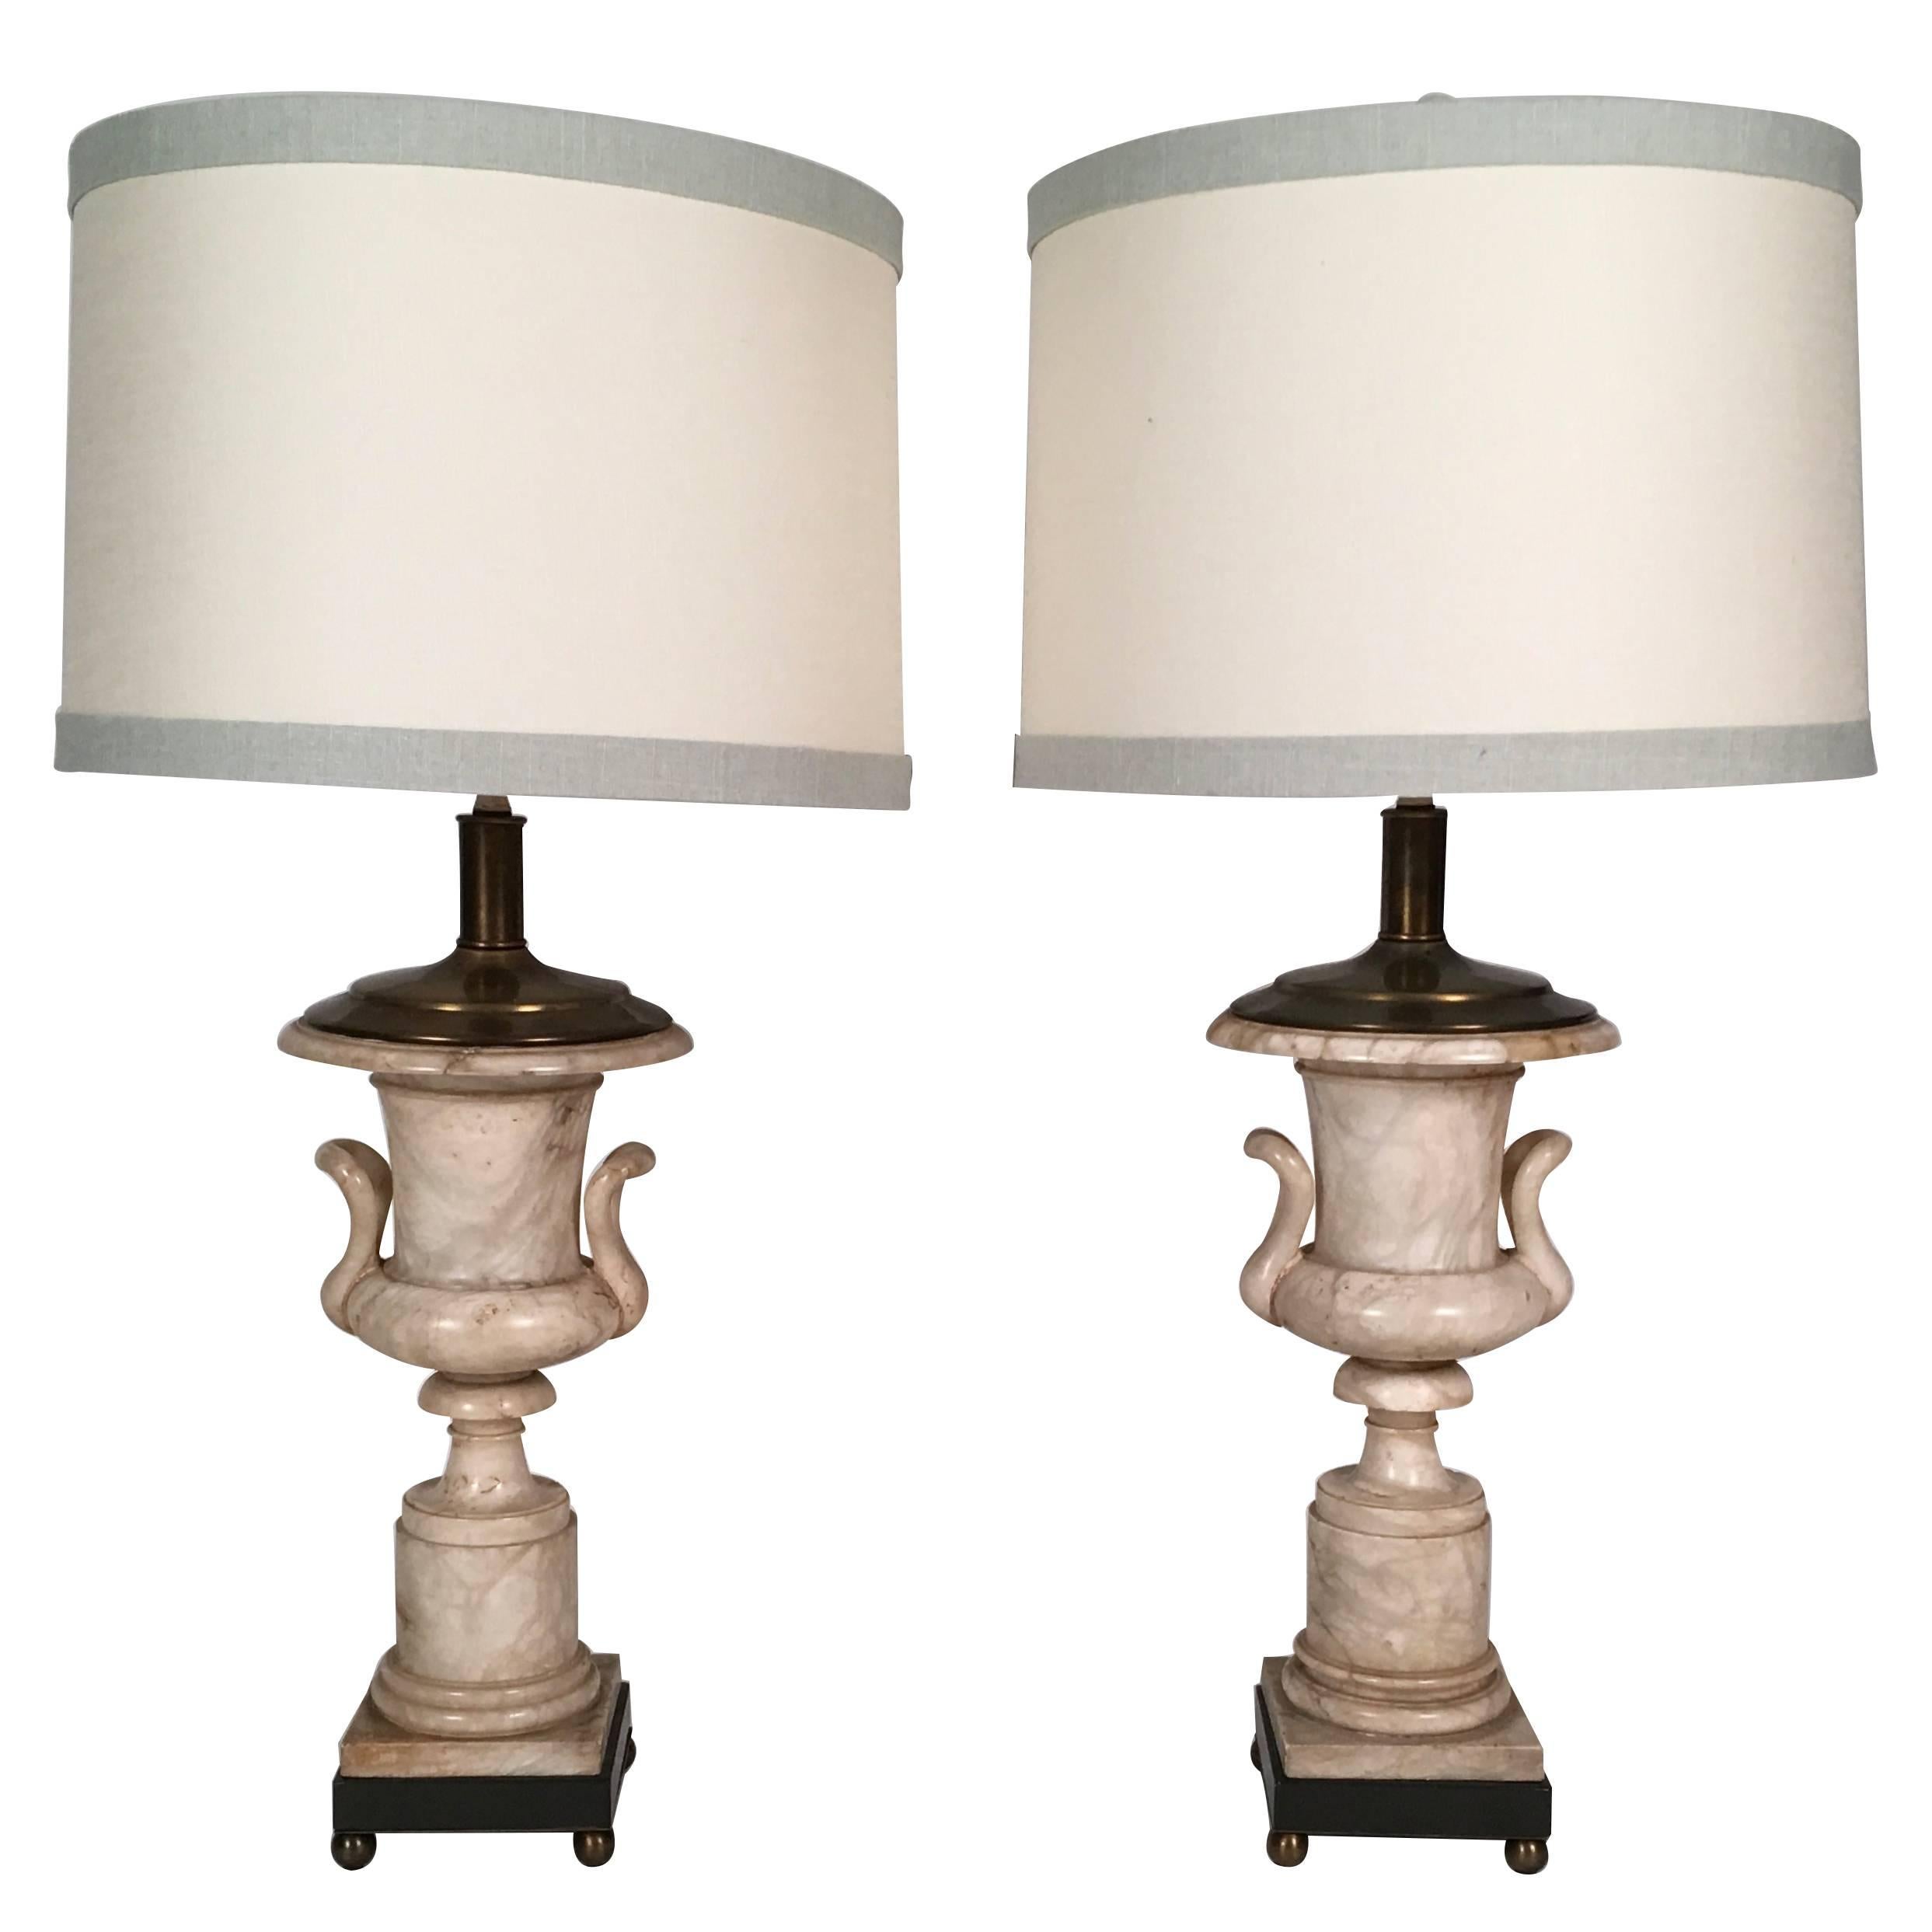 Pair of Italian Neoclassical Style Alabaster Urn Lamps